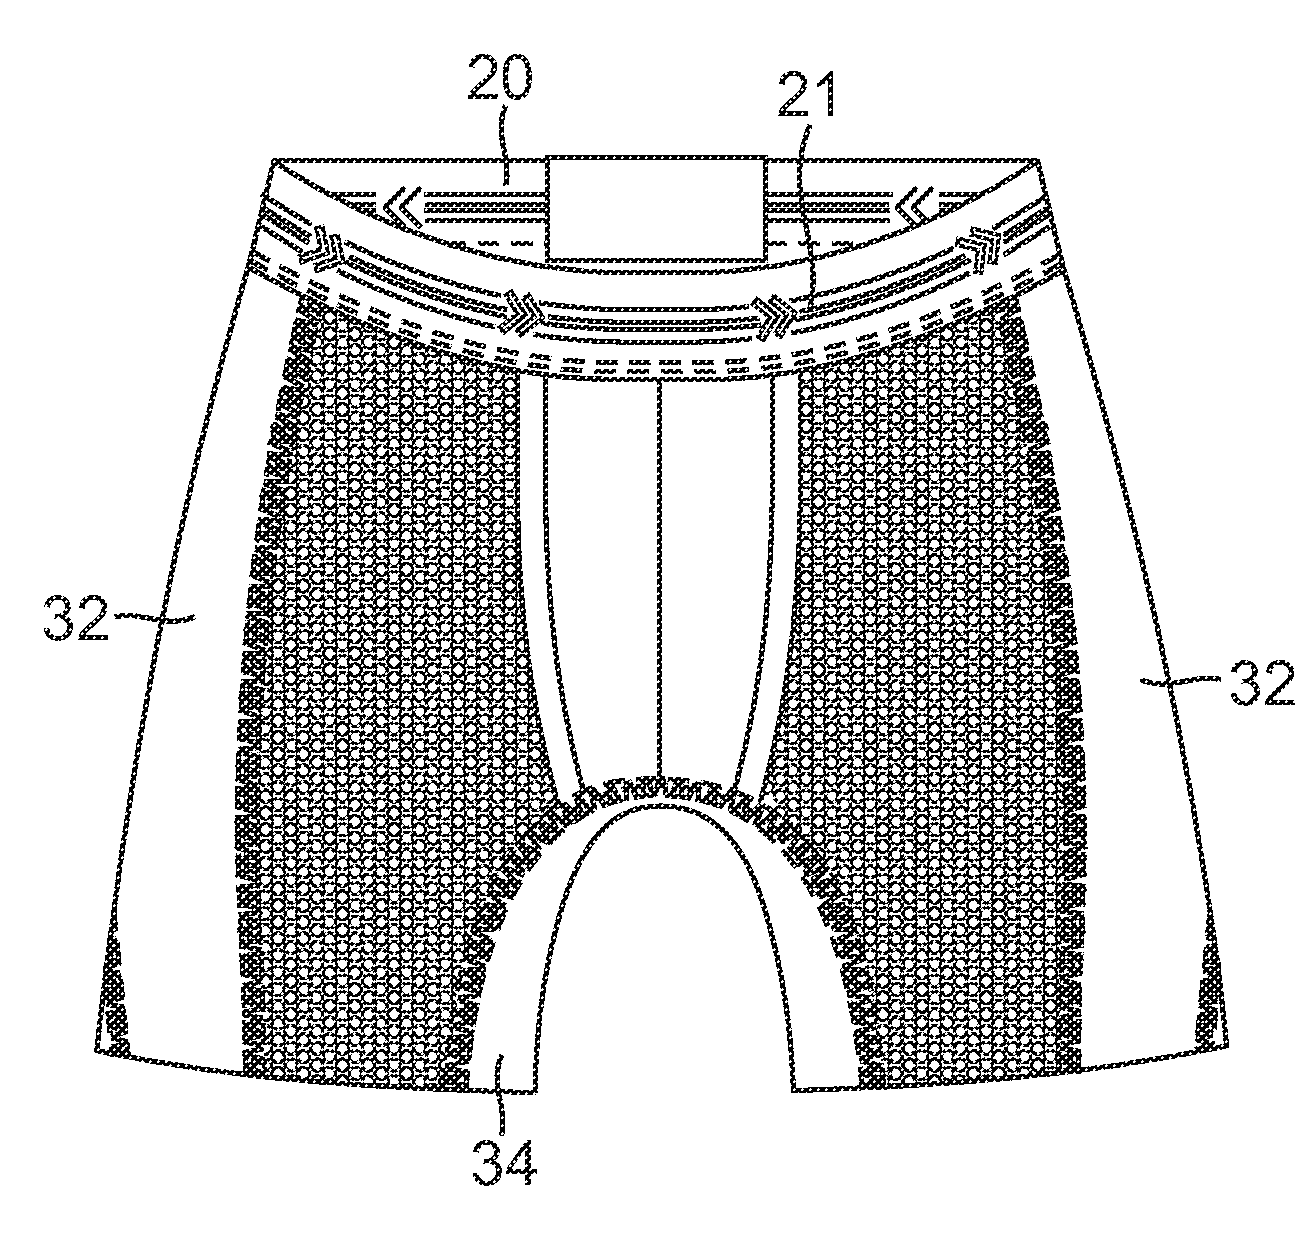 Attachment system for combination outer pant and liner